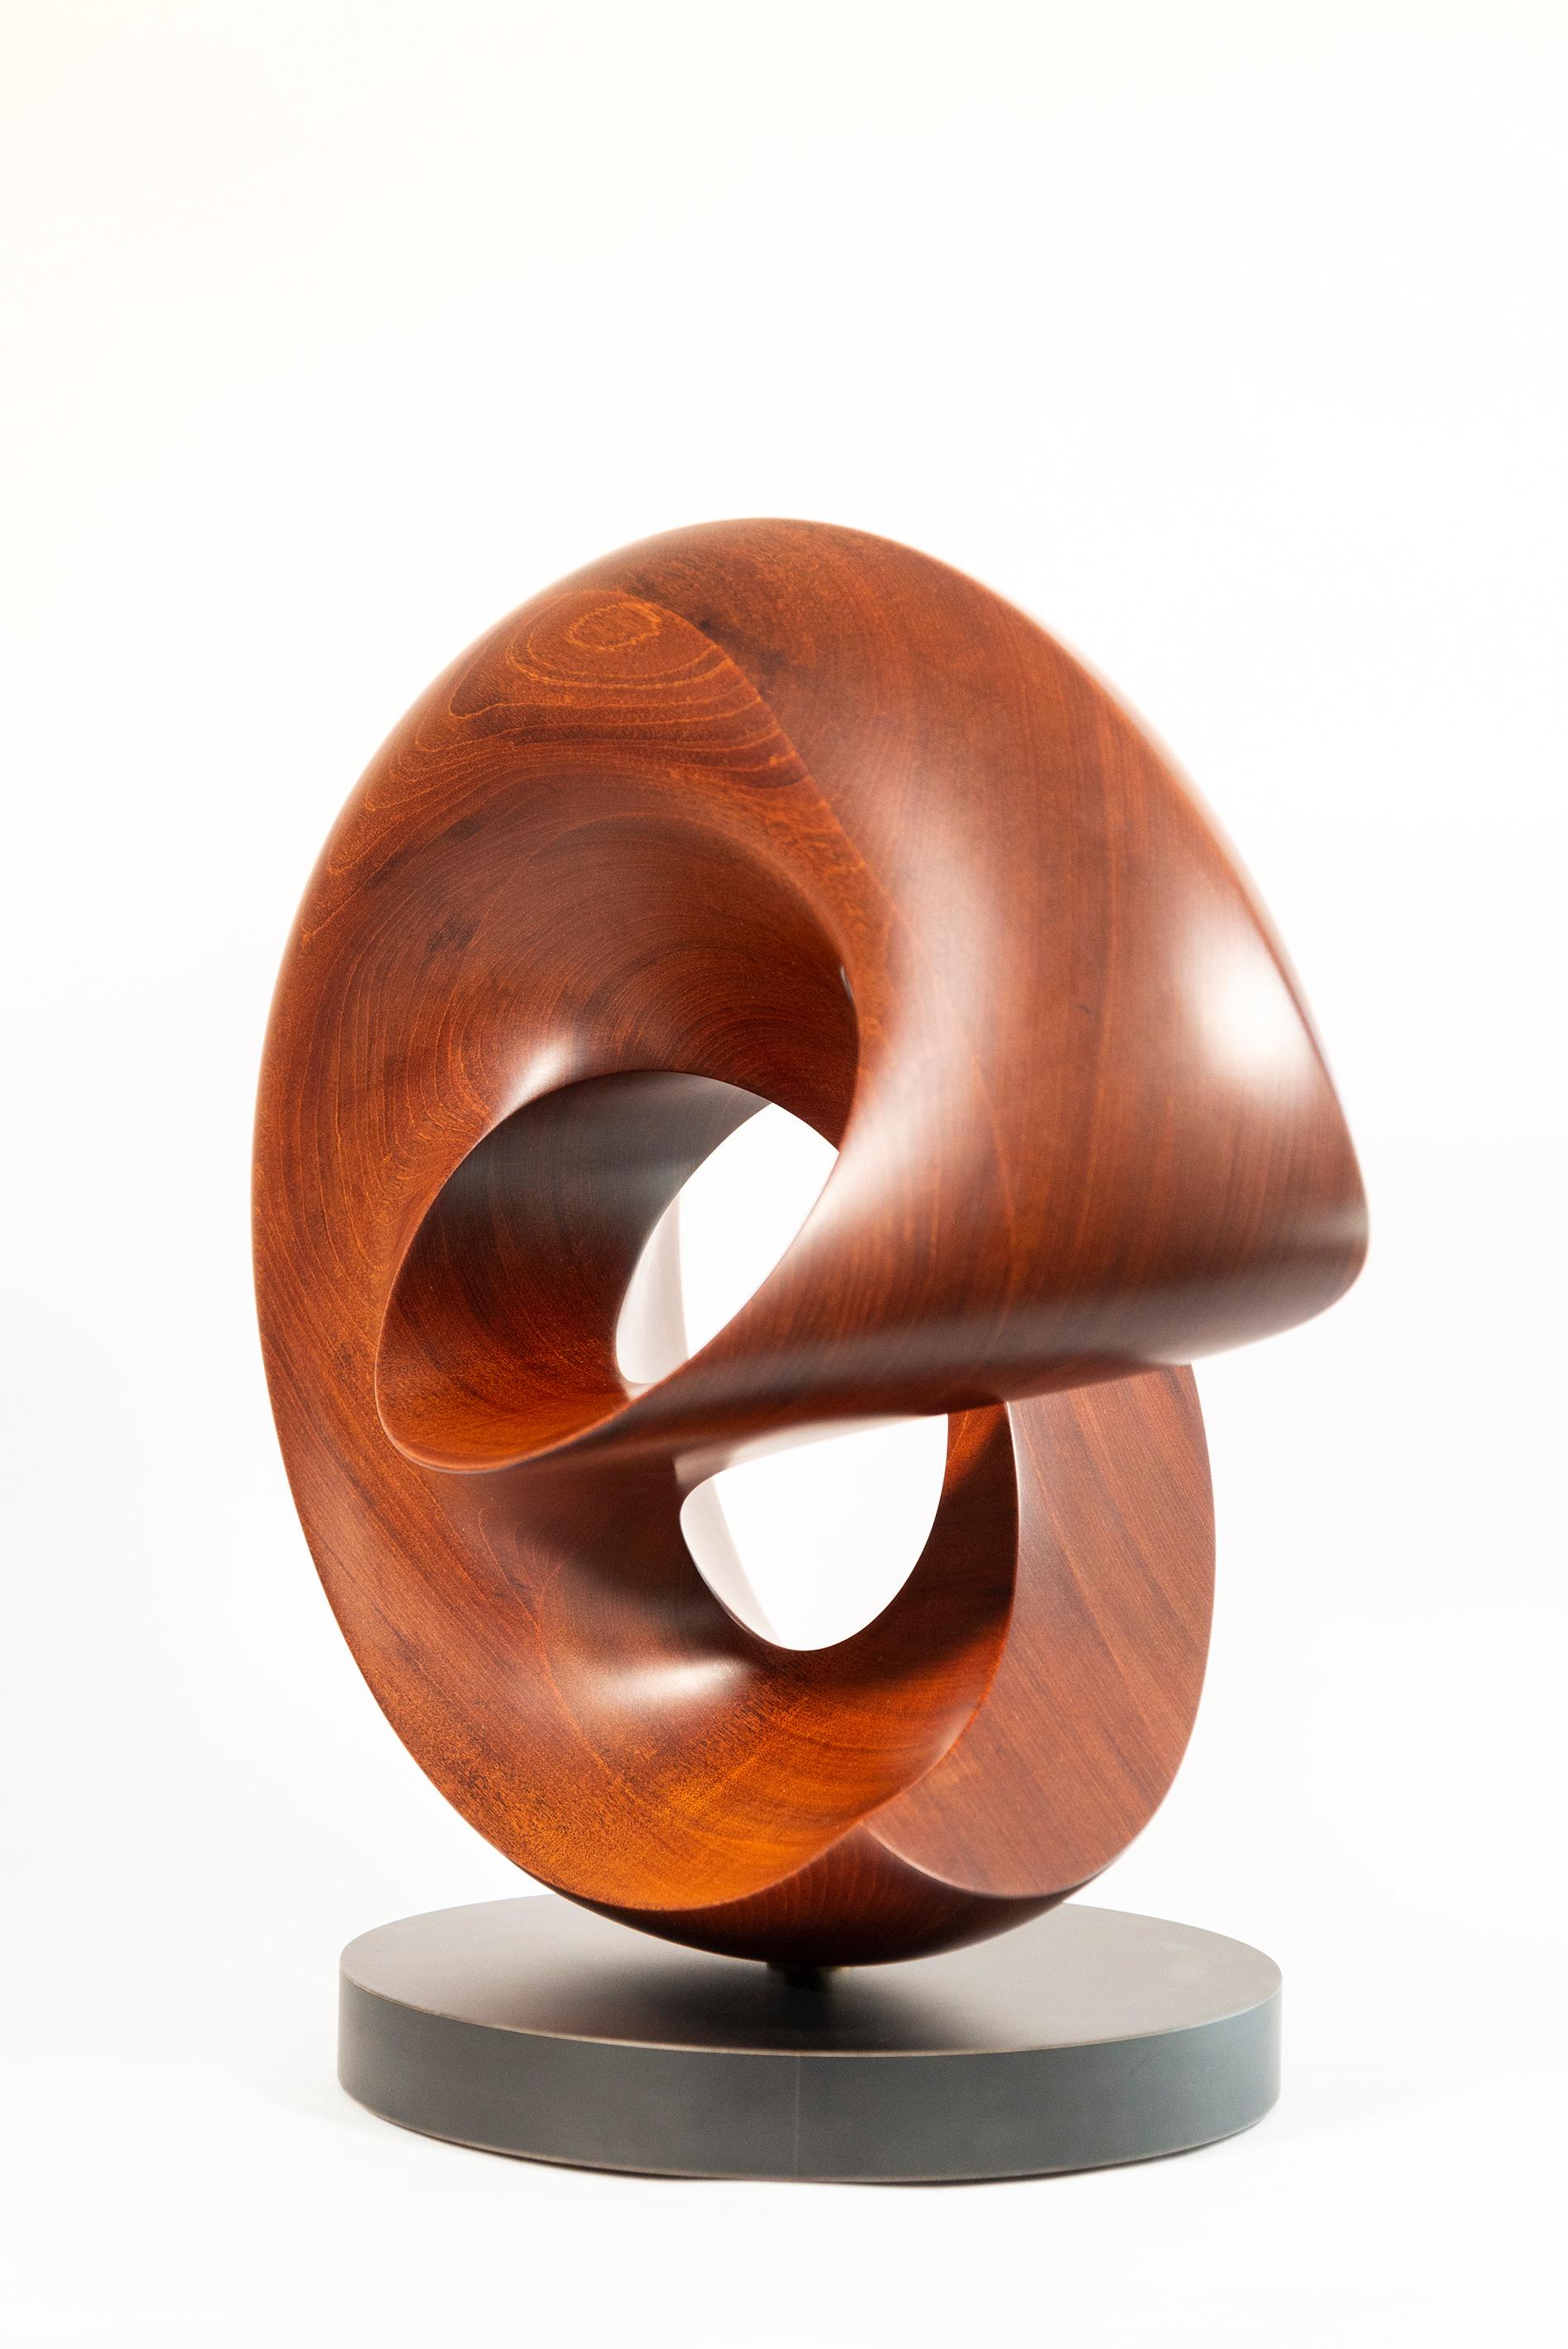 Fanfare - smooth, polished, abstract, contemporary, mahogany carved sculpture For Sale 4